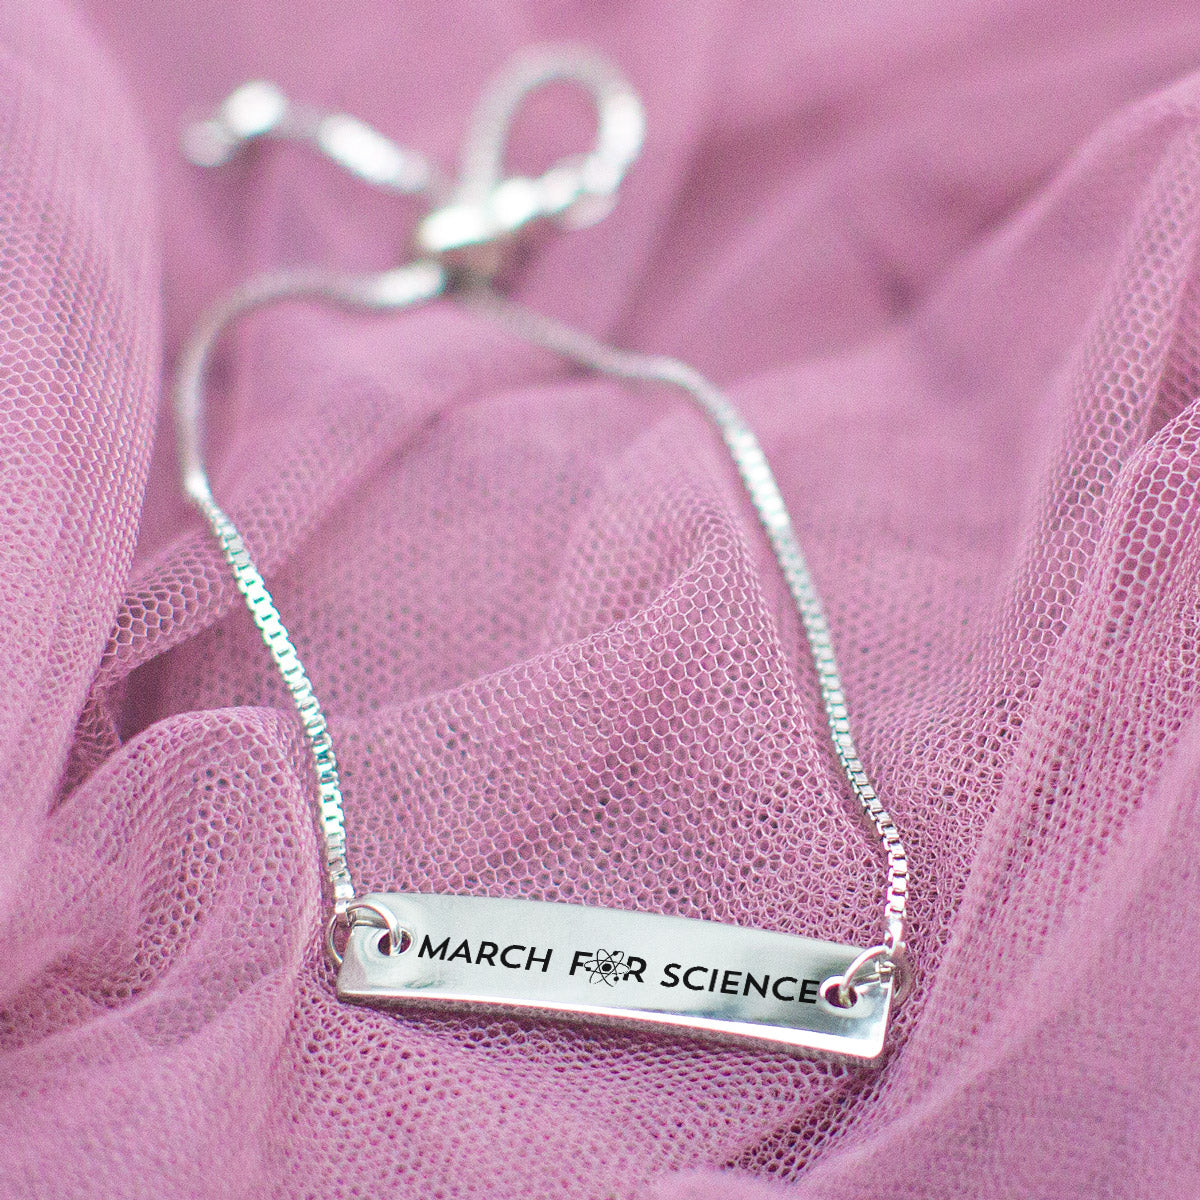 March for Science Silver Bar Adjustable Bracelet - pipercleo.com